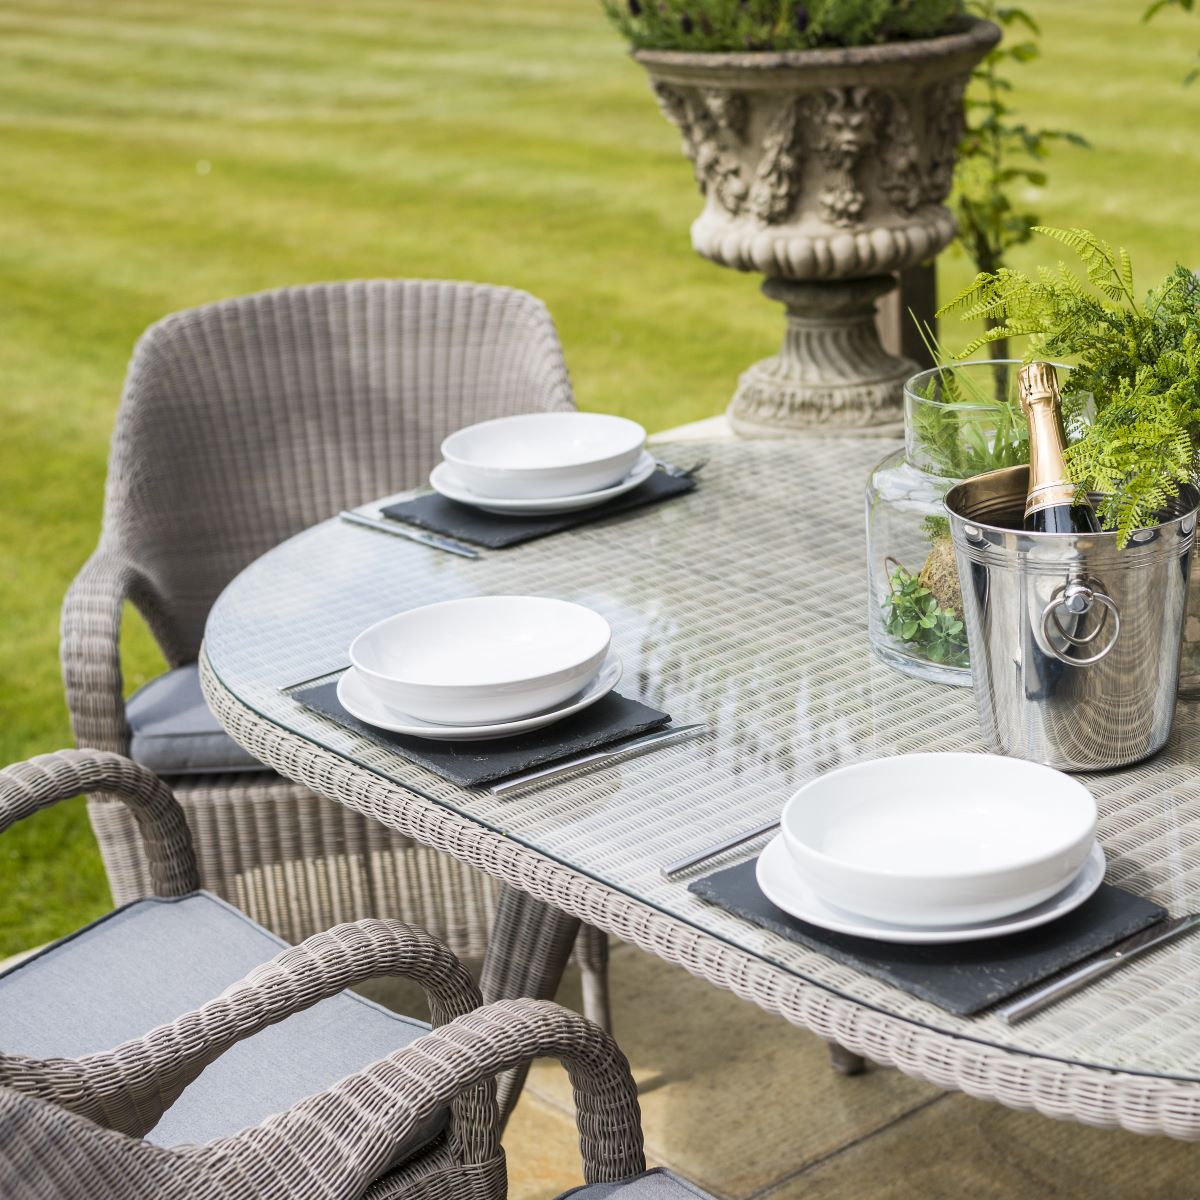 Sussex Outdoor Dining Set 6 Seat by 4 Seasons Outdoor